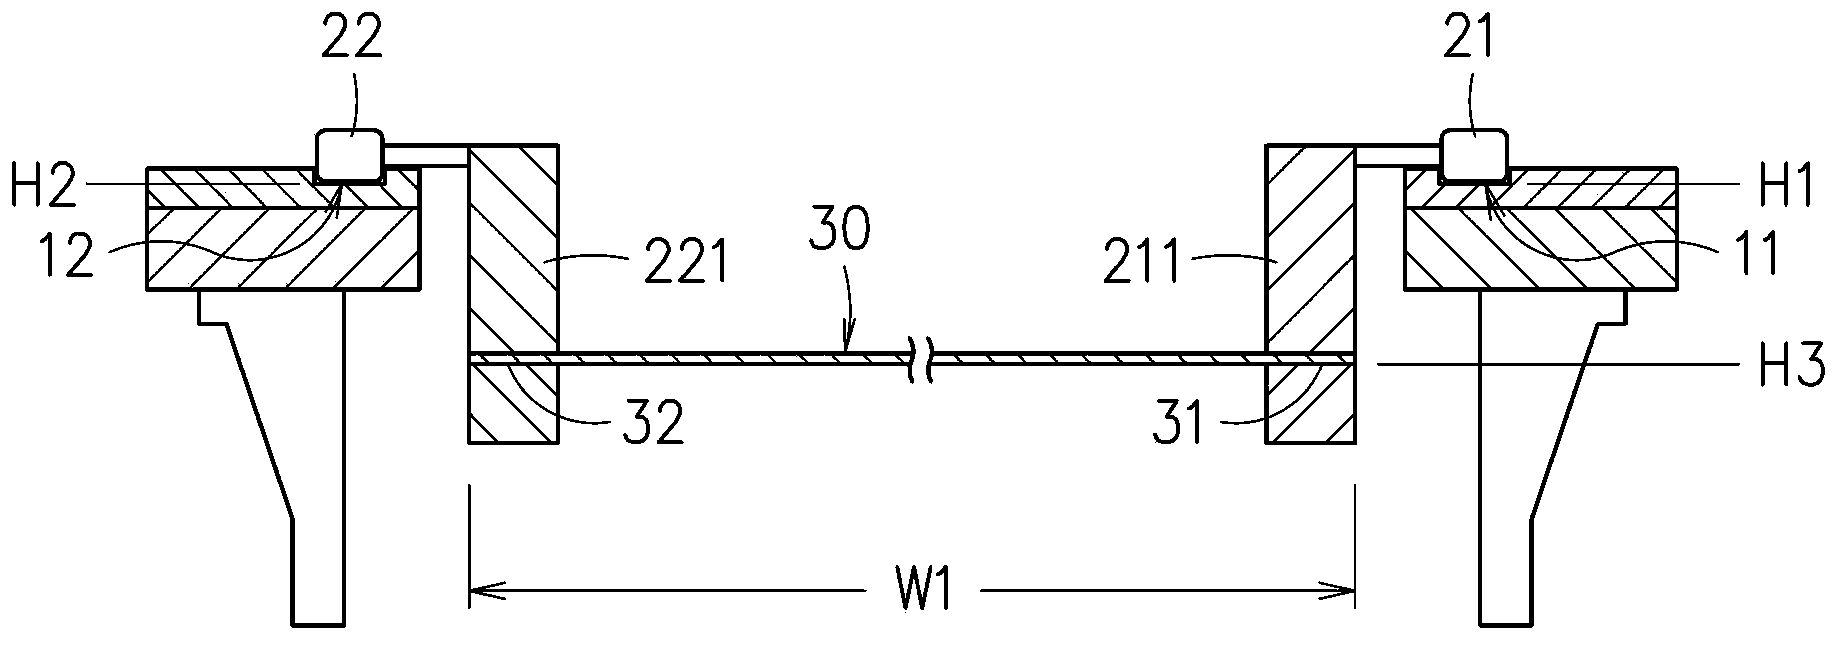 Substrate transmitting device